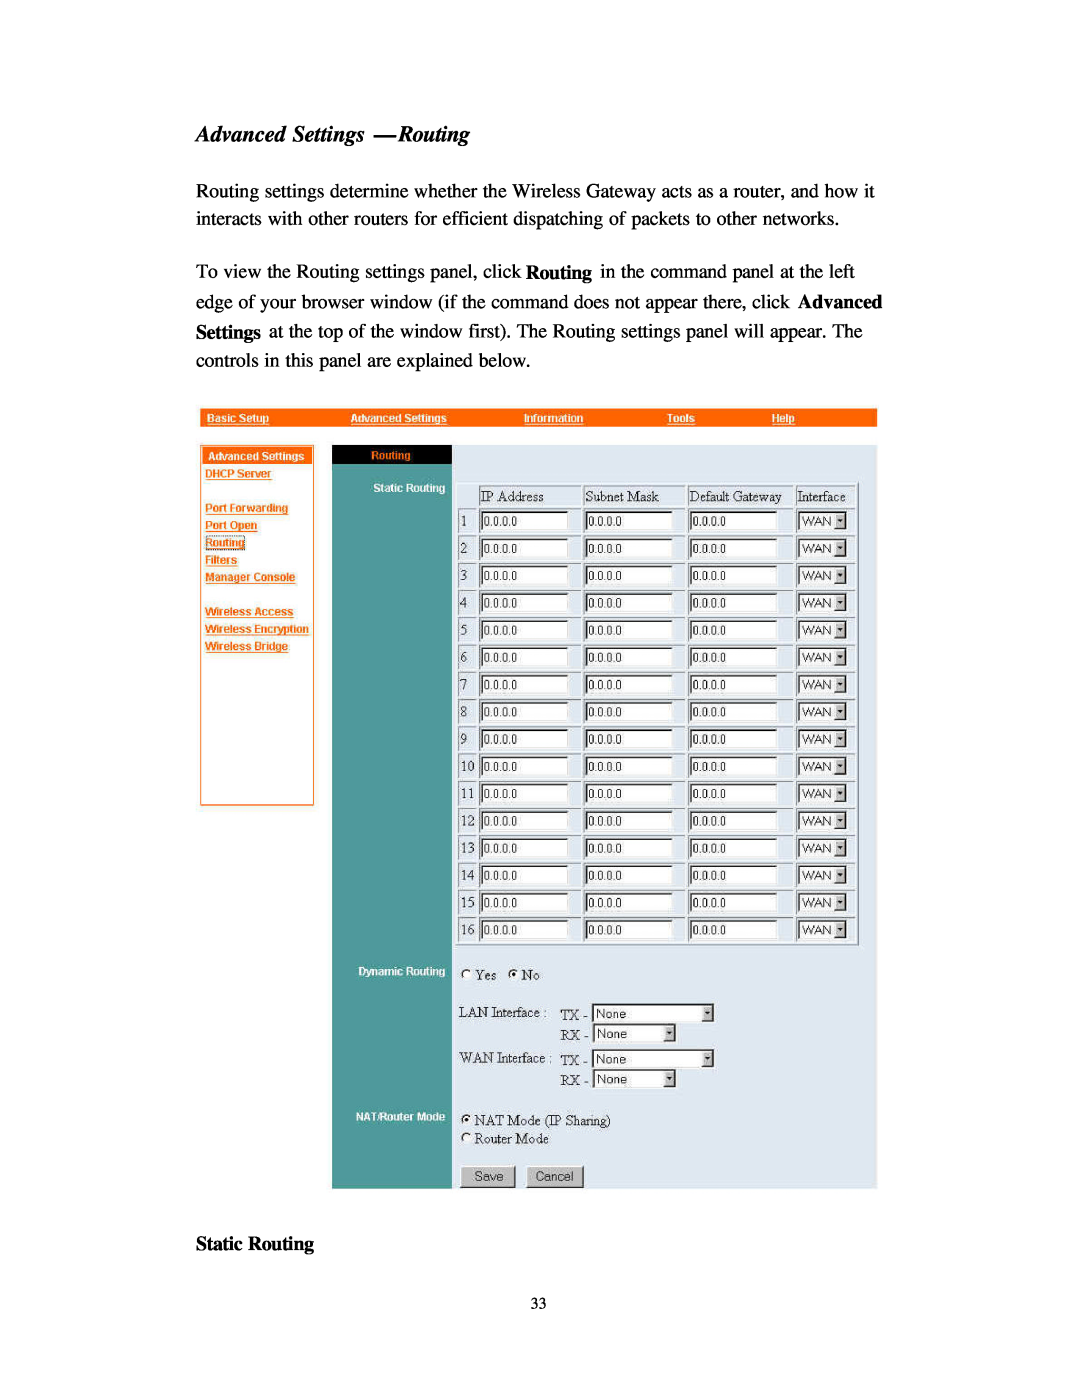 Nlynx Wireless Gateway manual Advanced Settings - Routing, Static Routing 